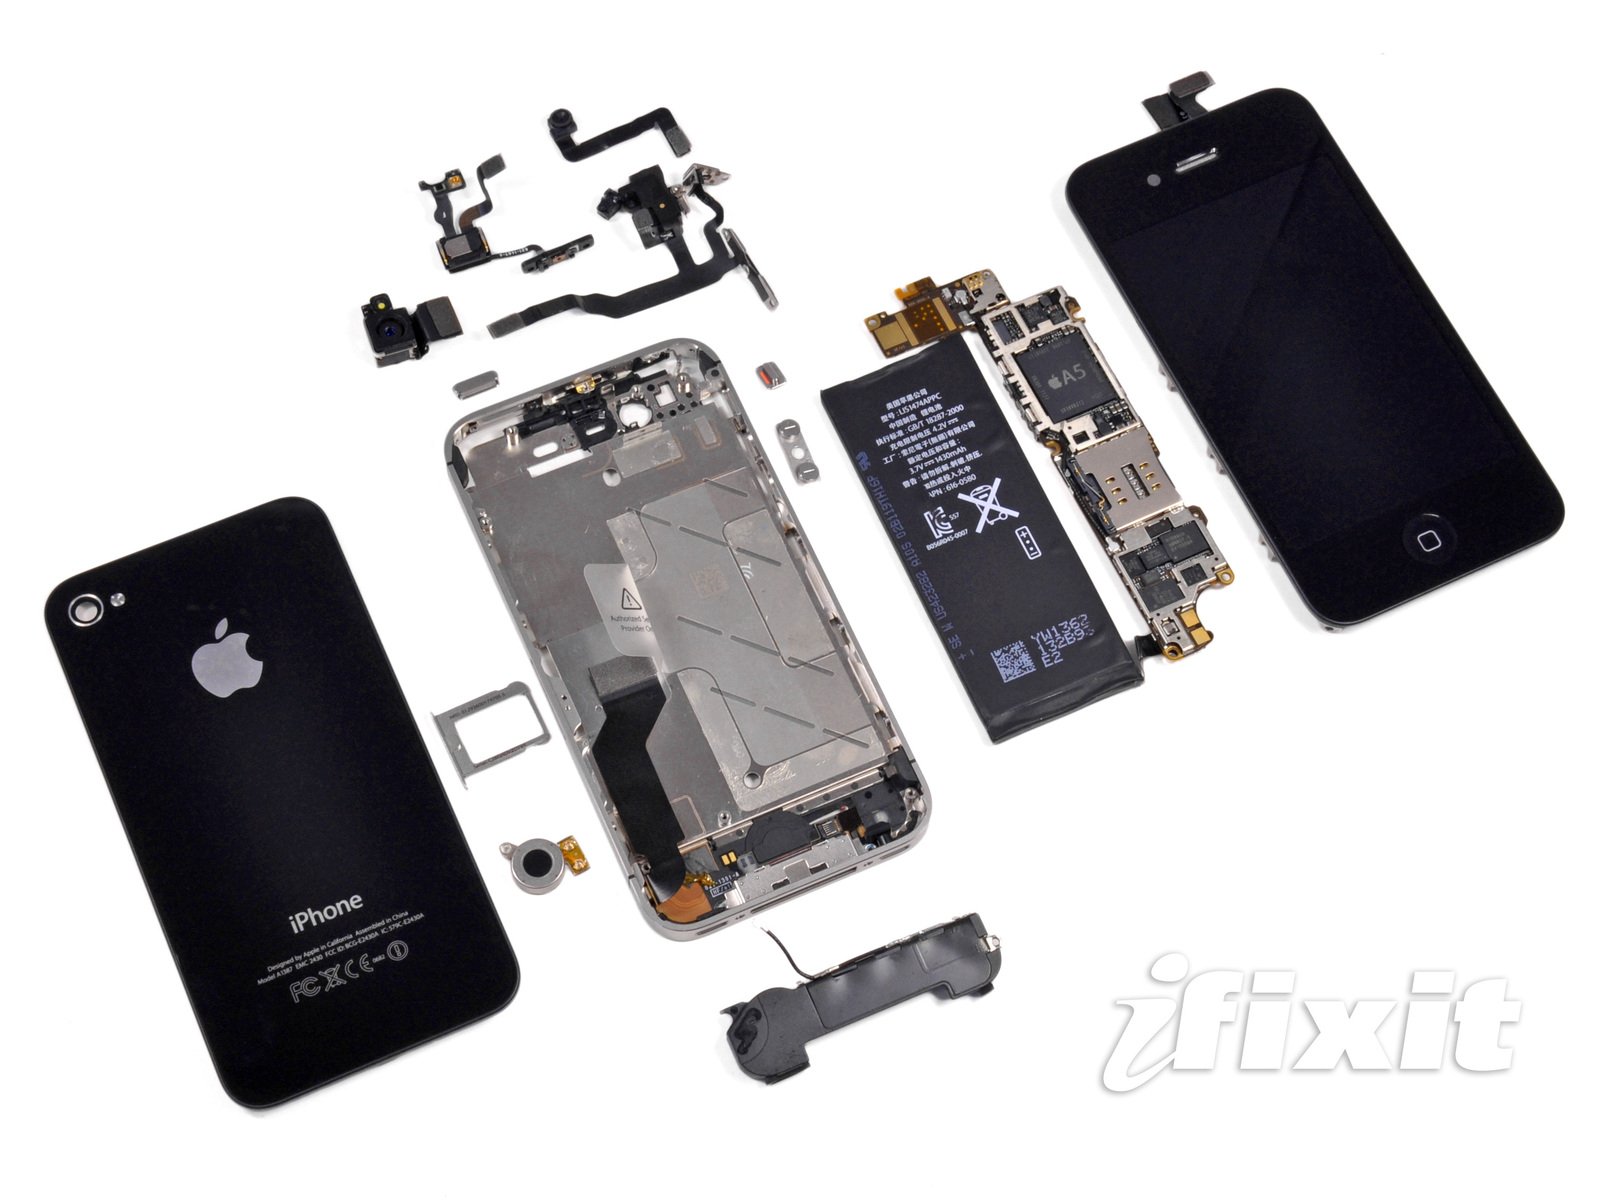 iPhone 4S parts from iFixit, show some of what scammers allegedly returned fake parts for in China.